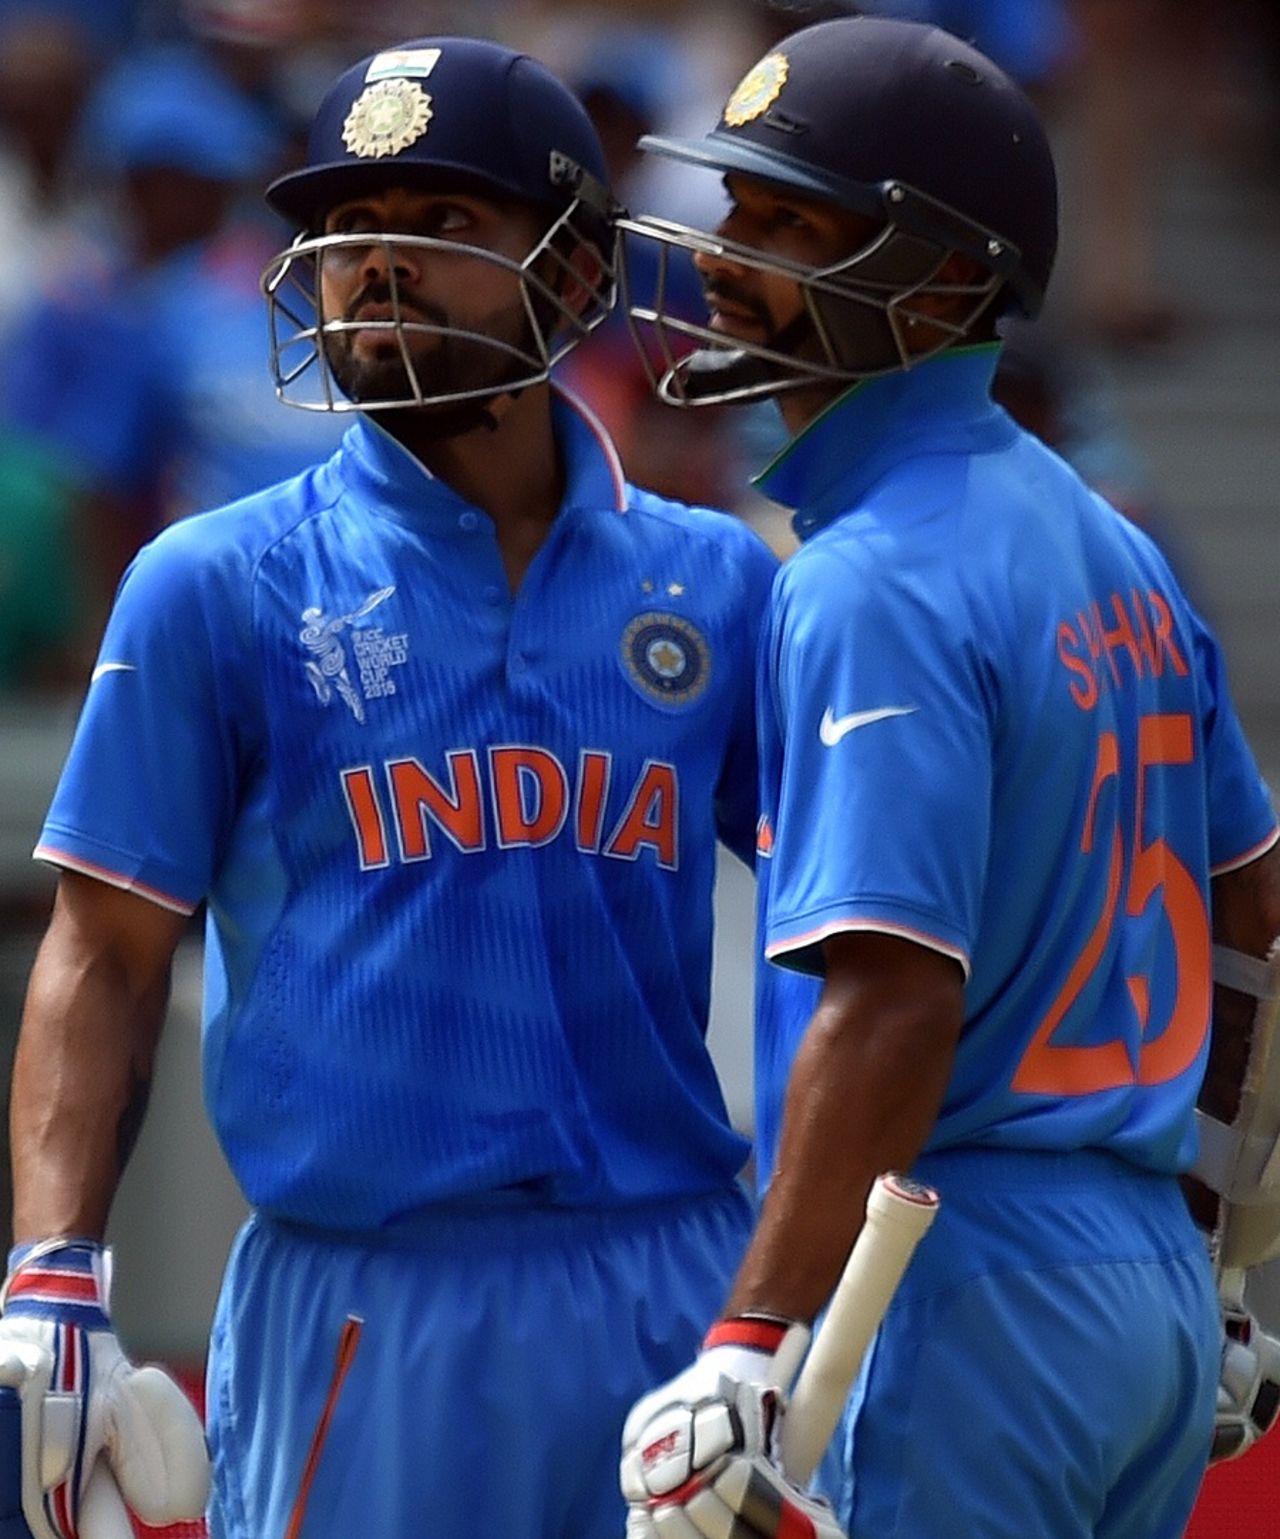 Virat Kohli and Shikhar Dhawan have a word, India v South Africa, World Cup 2015, Group B, Melbourne, February 22, 2015